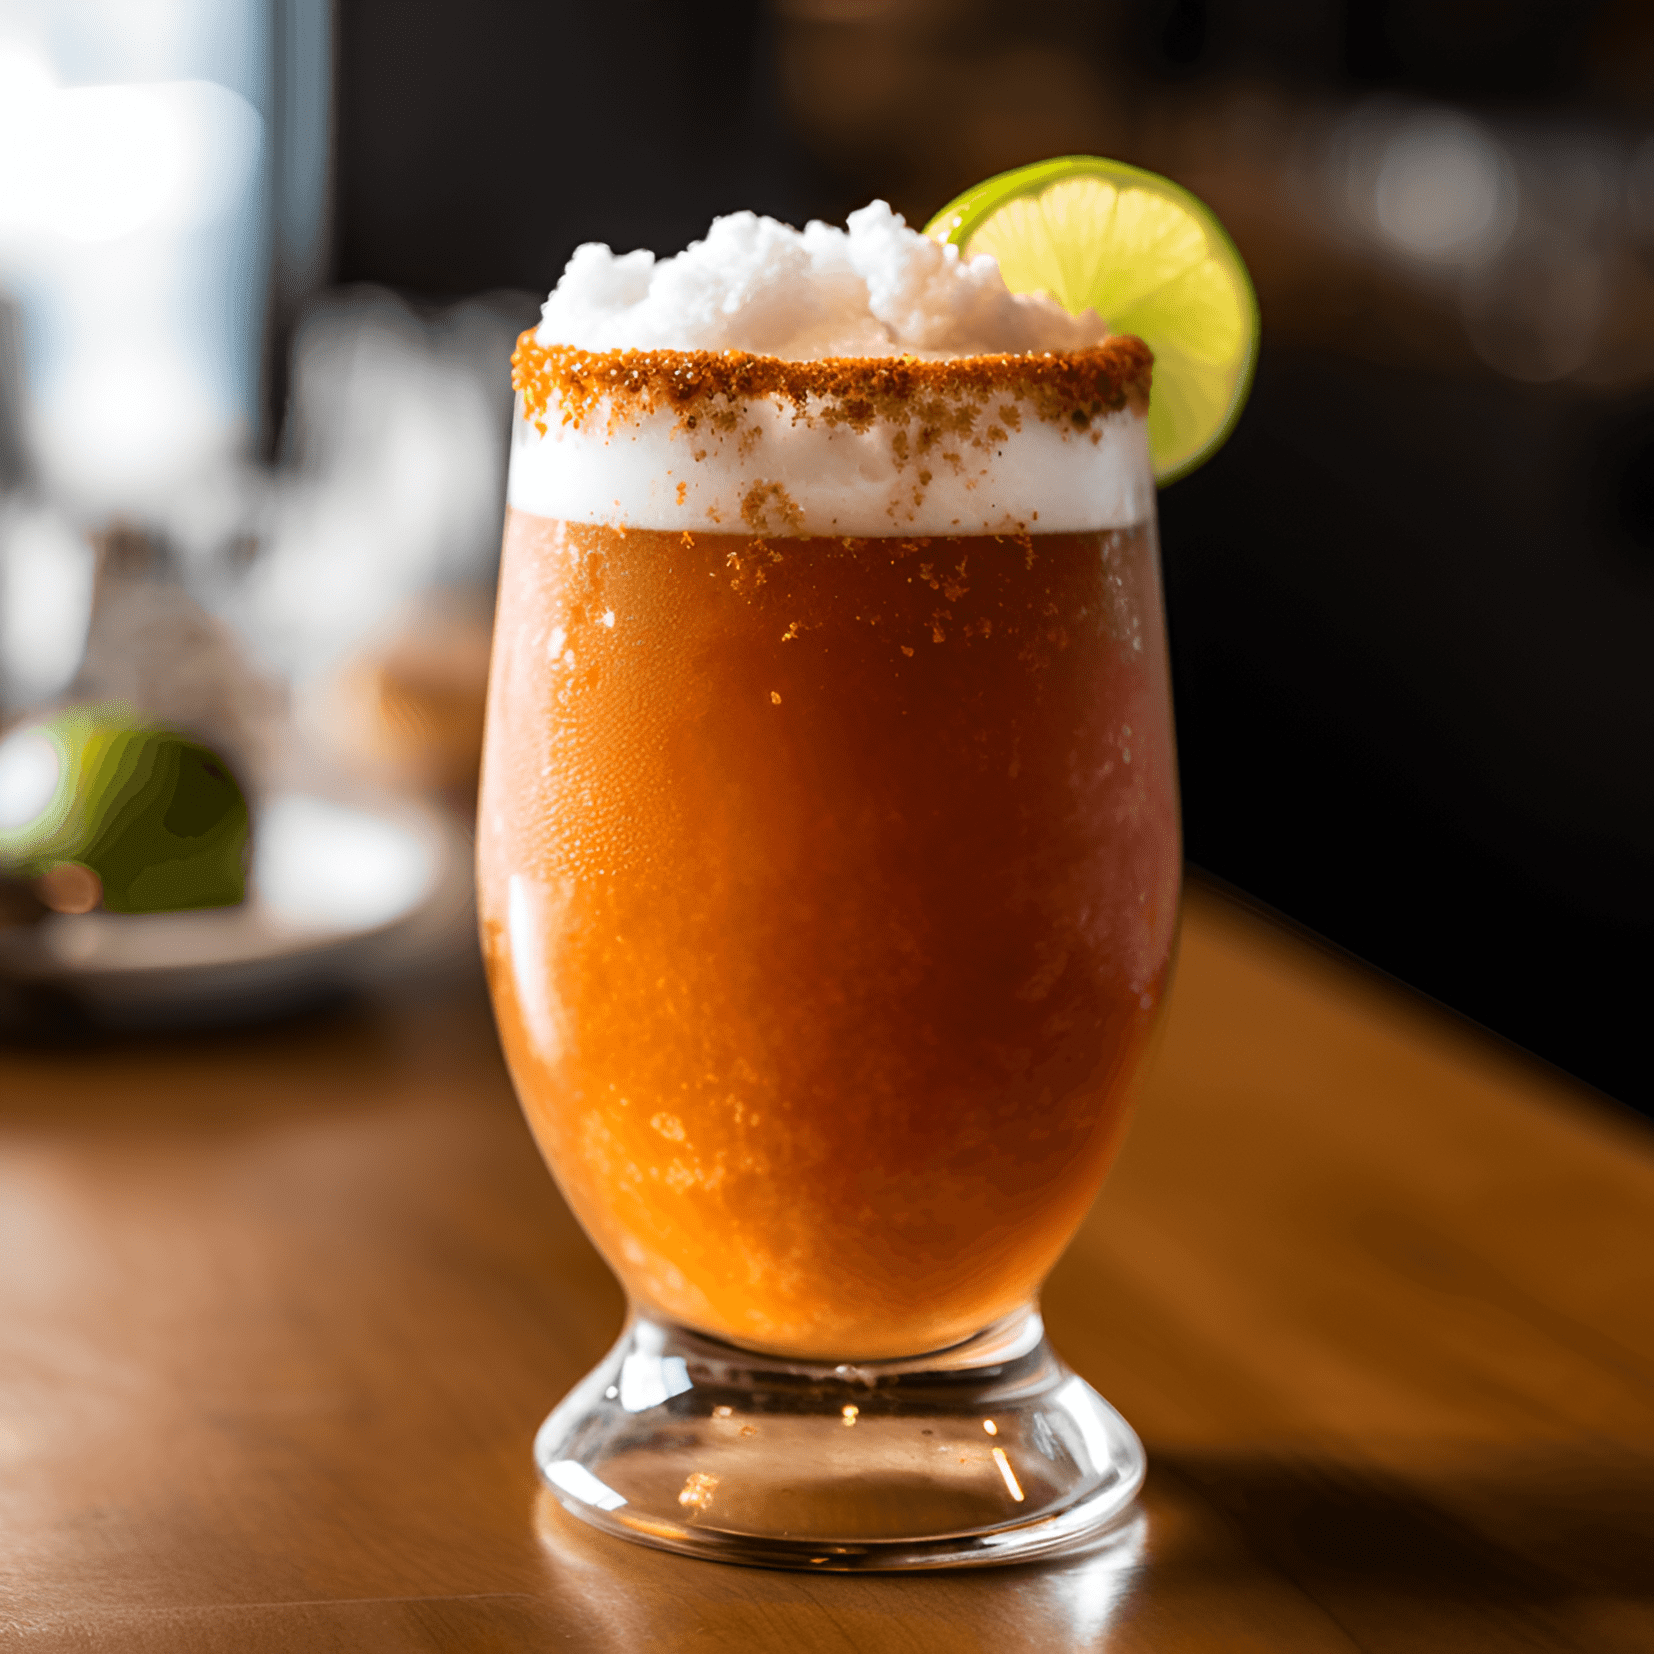 The Michelada has a unique, tangy taste that combines the flavors of beer, lime, and spices. It is savory, slightly spicy, and has a hint of saltiness. The overall taste is refreshing and invigorating.